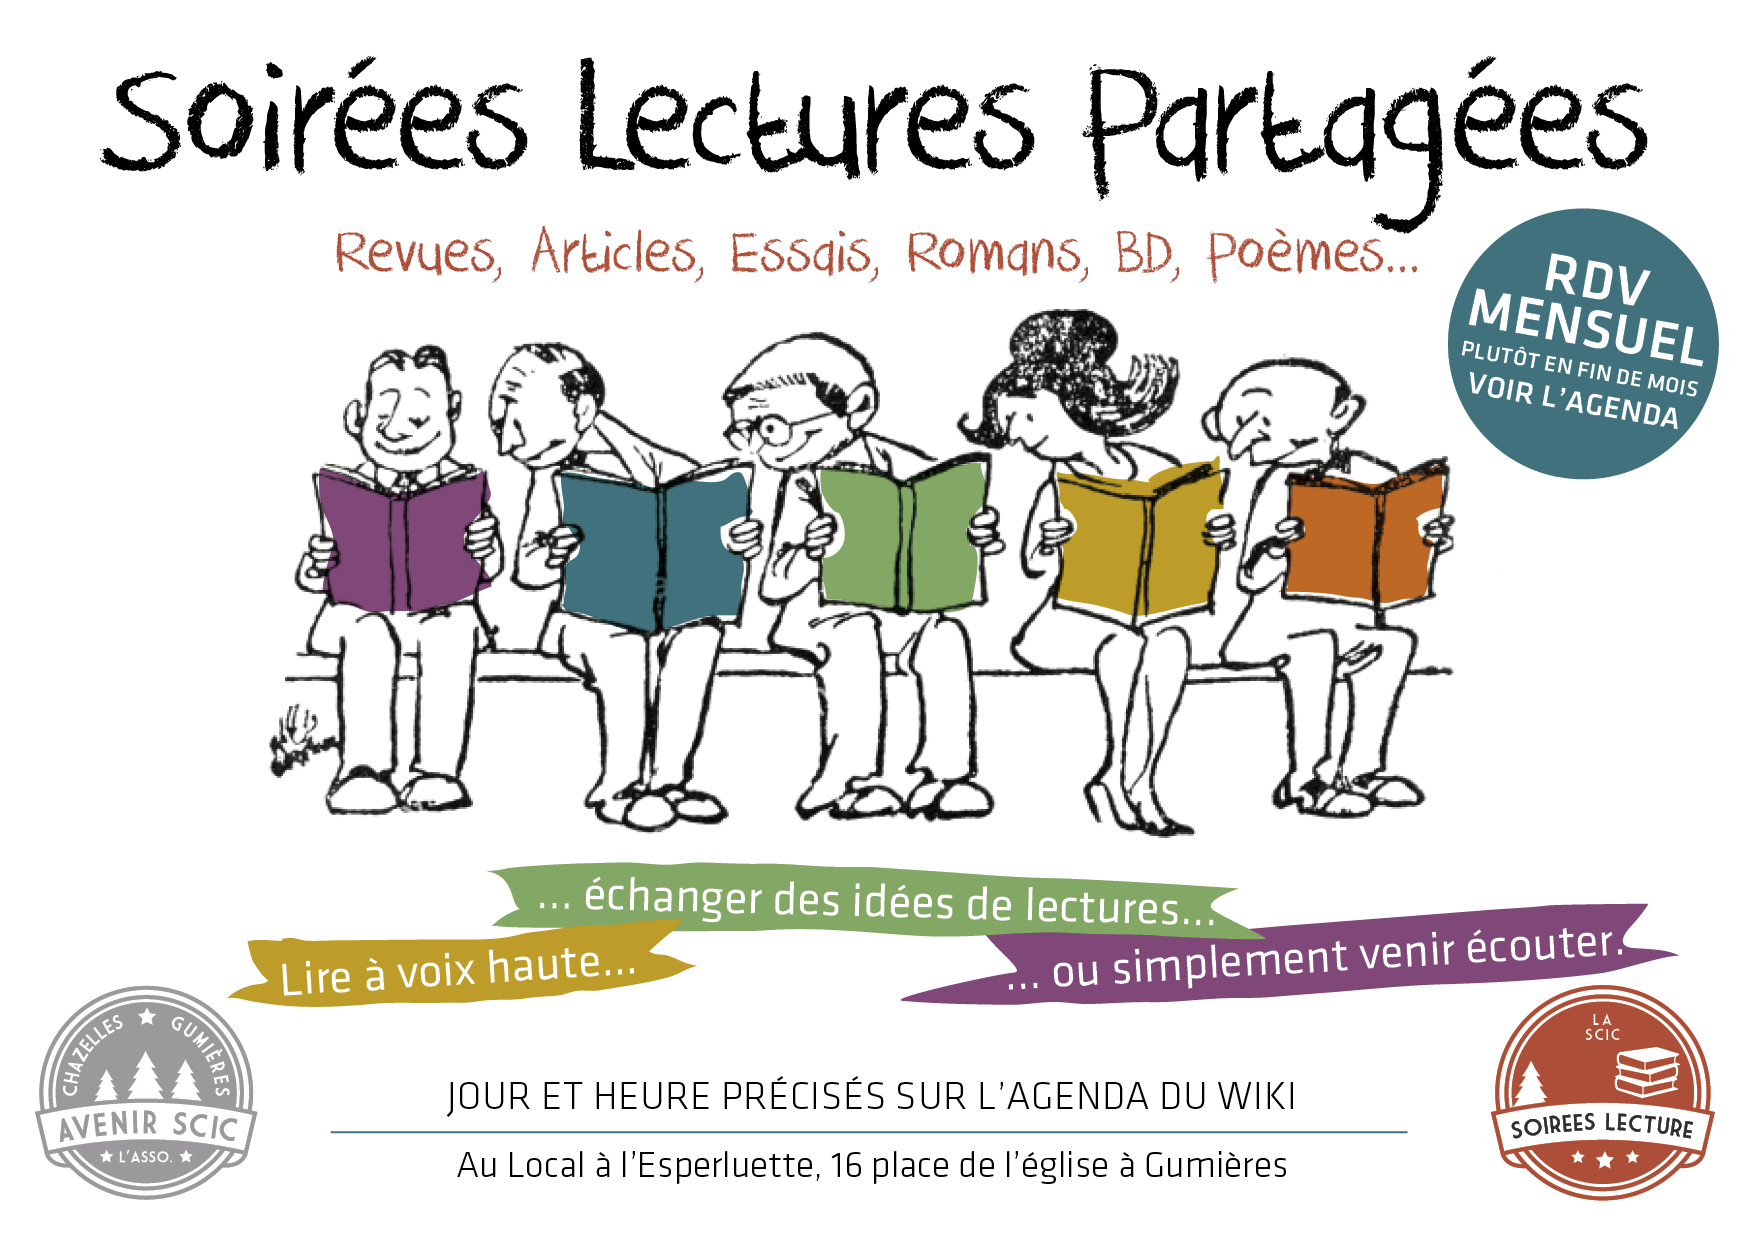 image affiche_soirses_lecture_H.jpg (0.7MB)